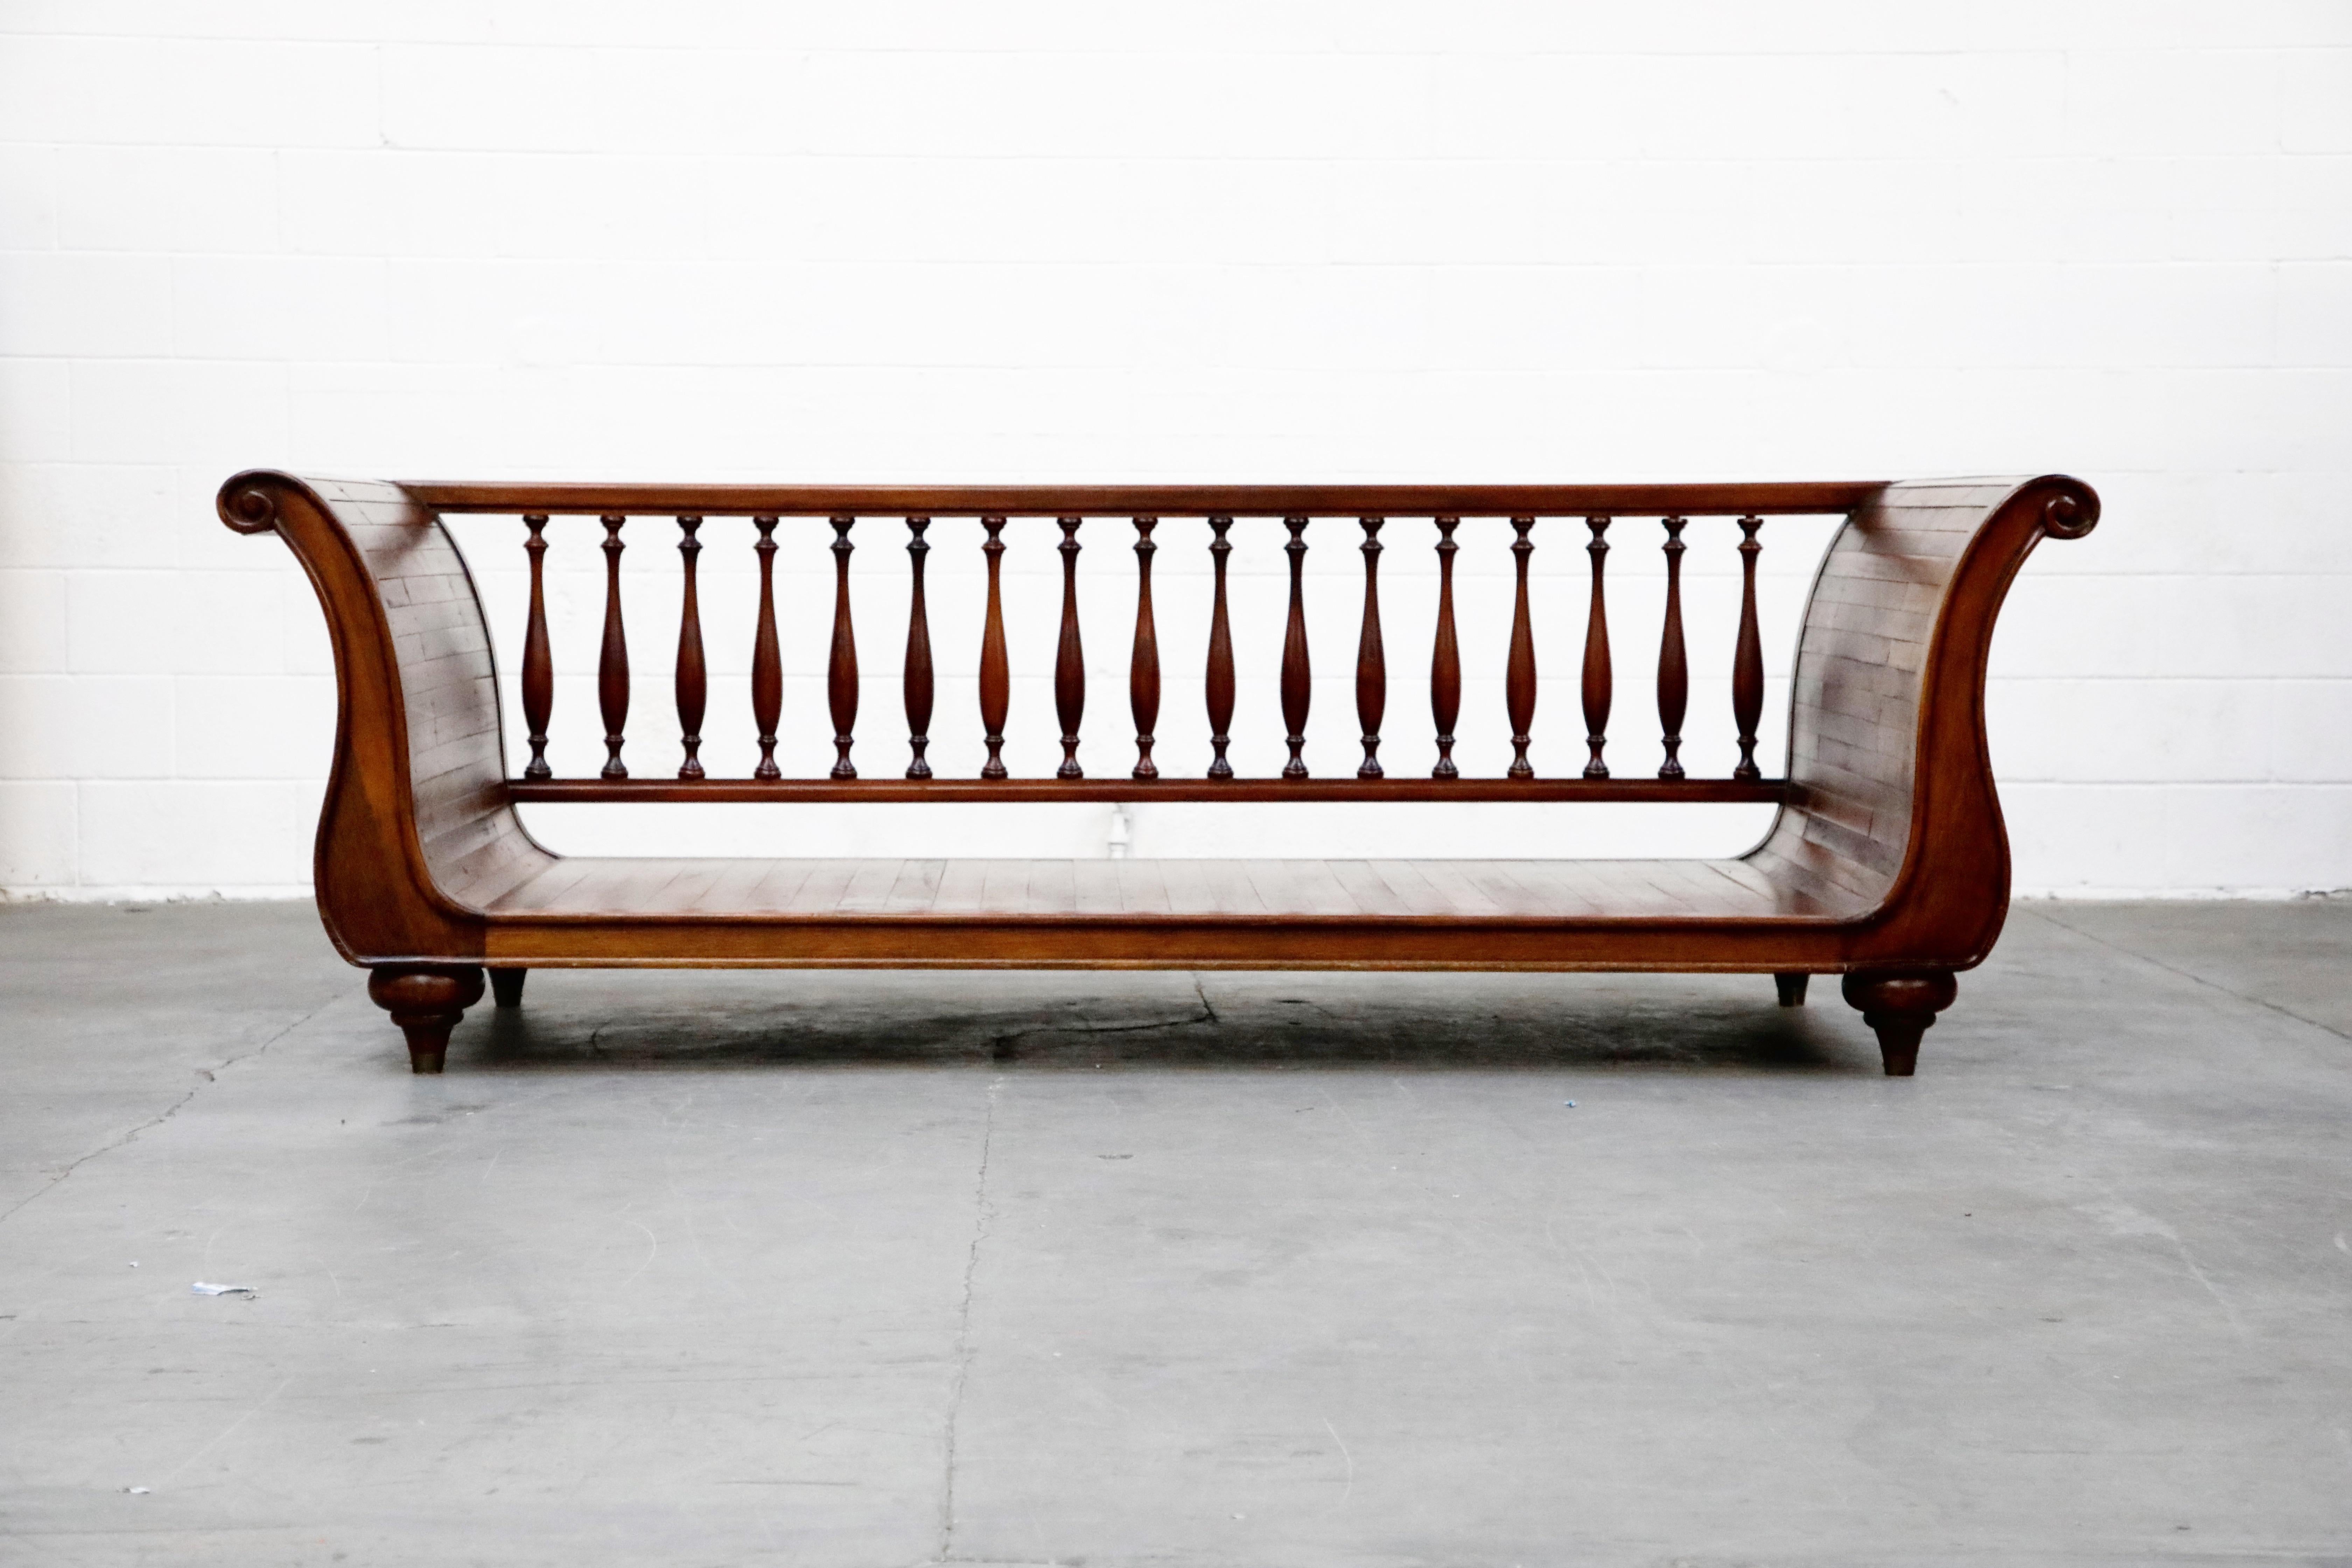 An incredible high quality wood daybed in sleigh form by Henredon. This designer piece features a spindle rail back with 17 turned wood spindles, turned wood bun legs / feet, and strips of wood planks assembled in a sleigh form with rolled arms.